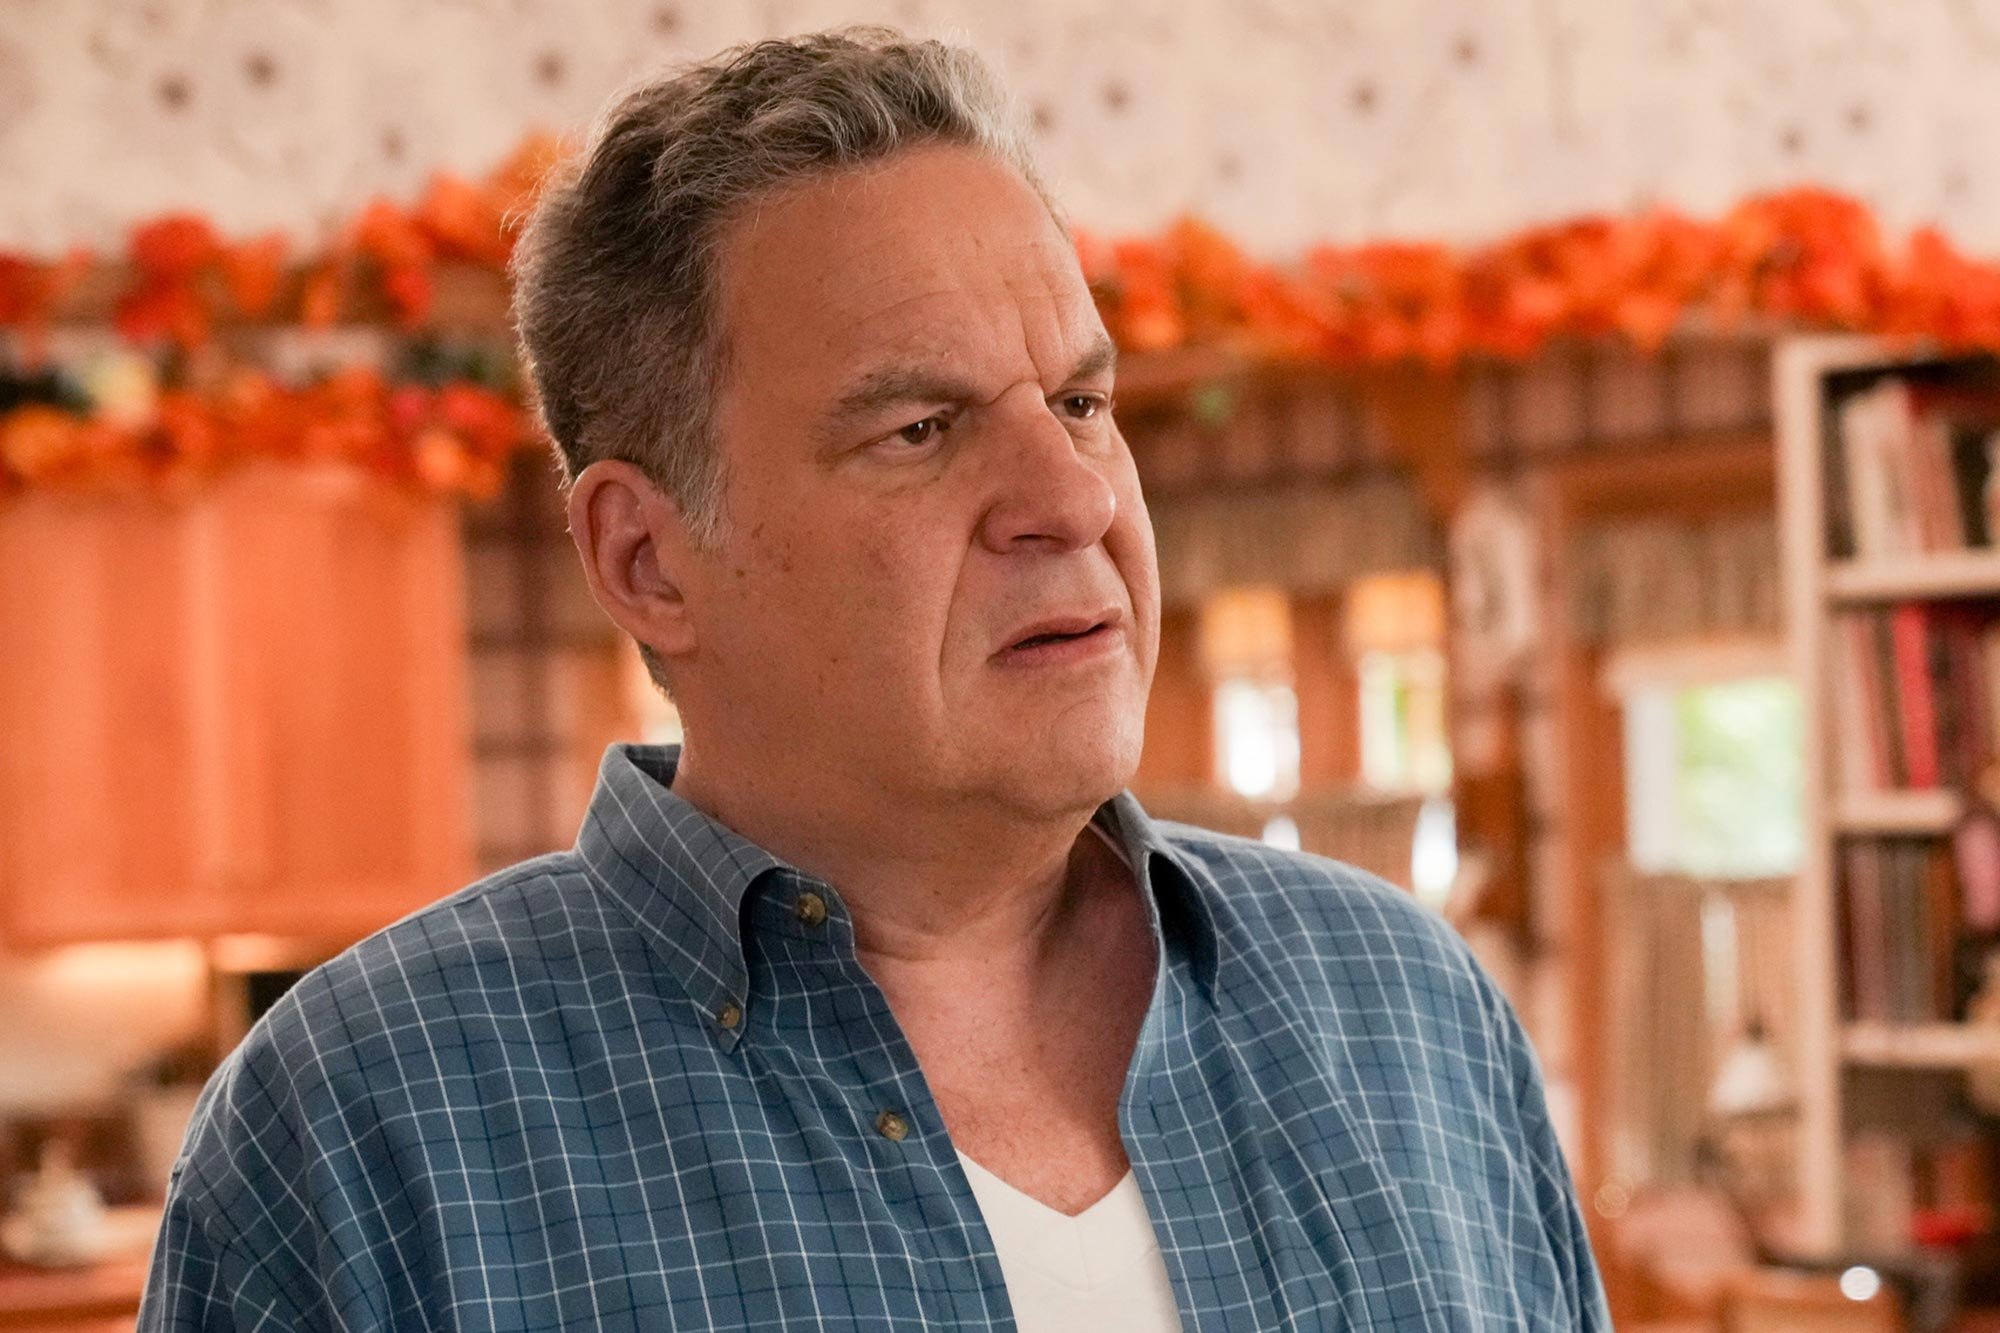 Jeff Garlin joins the team of Never Have I Ever Season 4